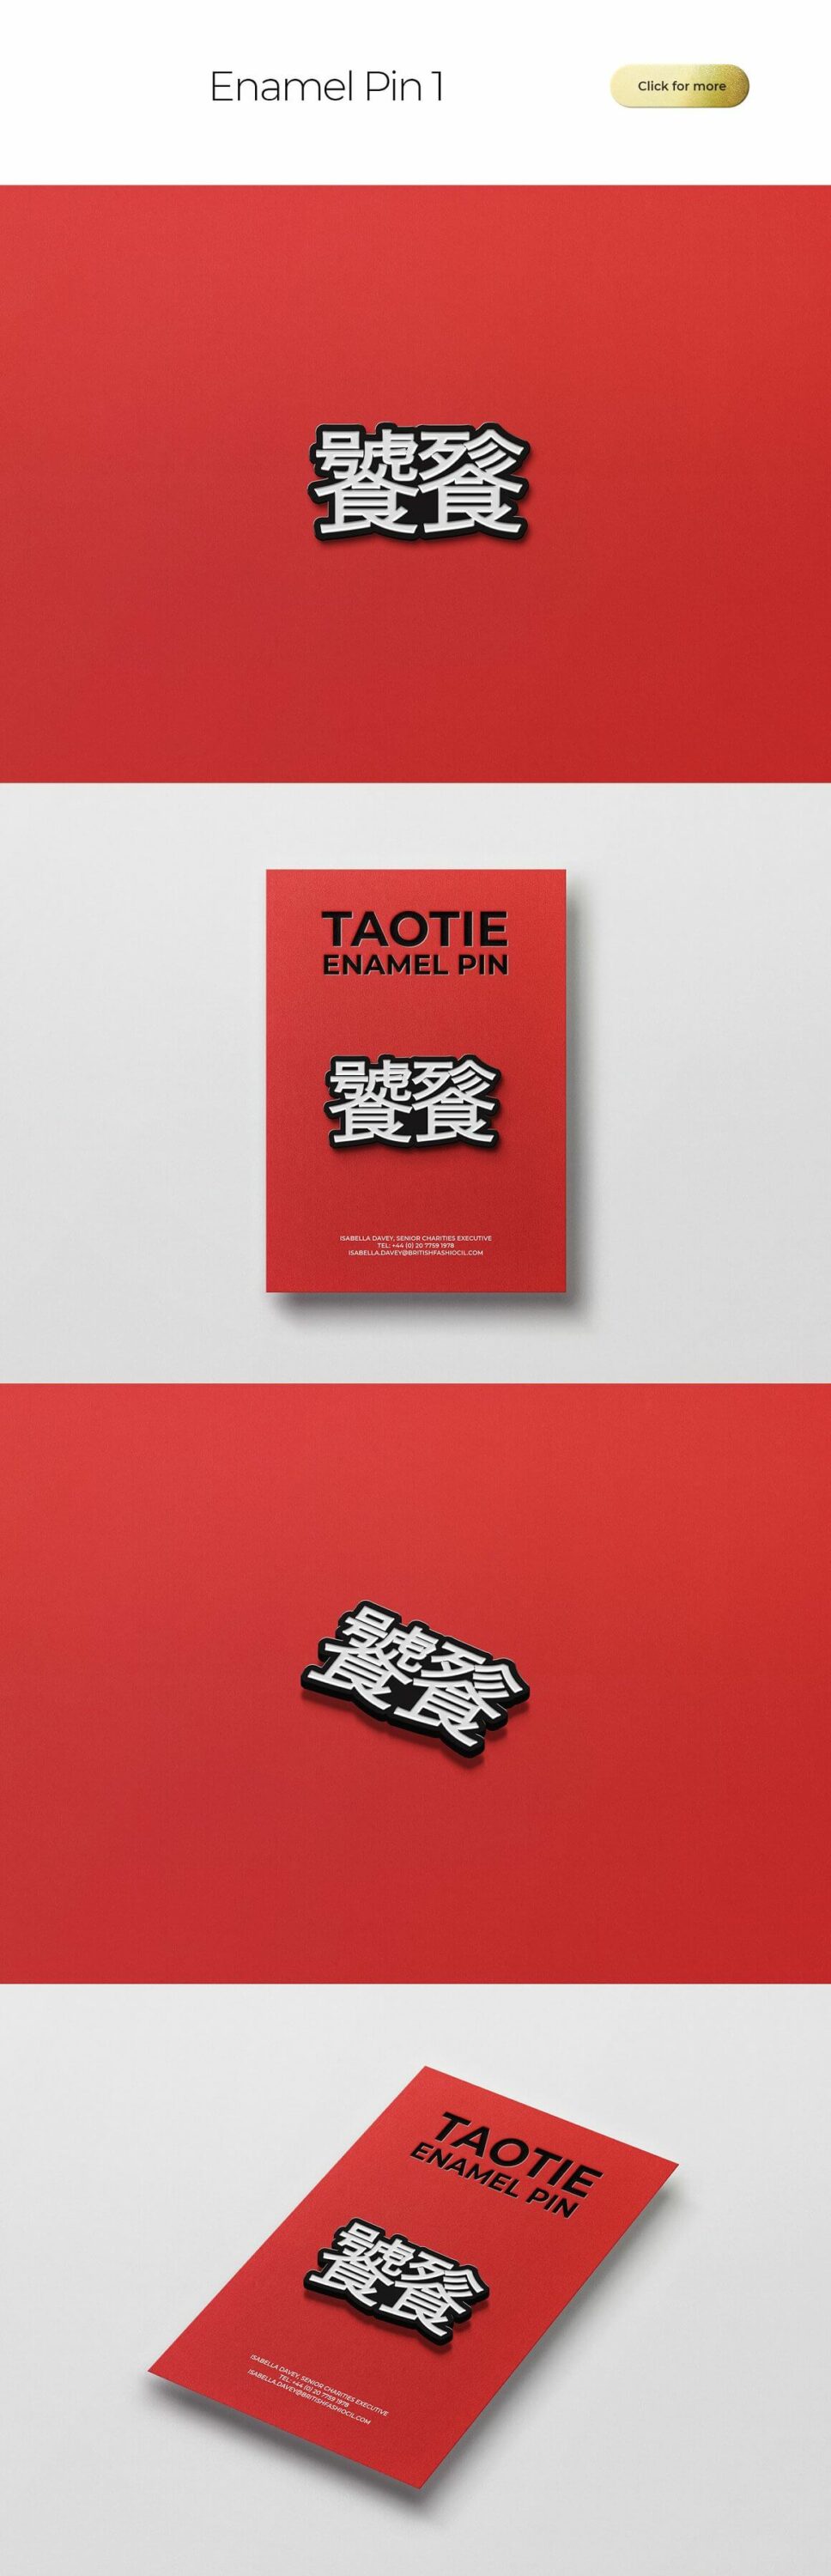 Taotie Enamel pin on the white and red background.